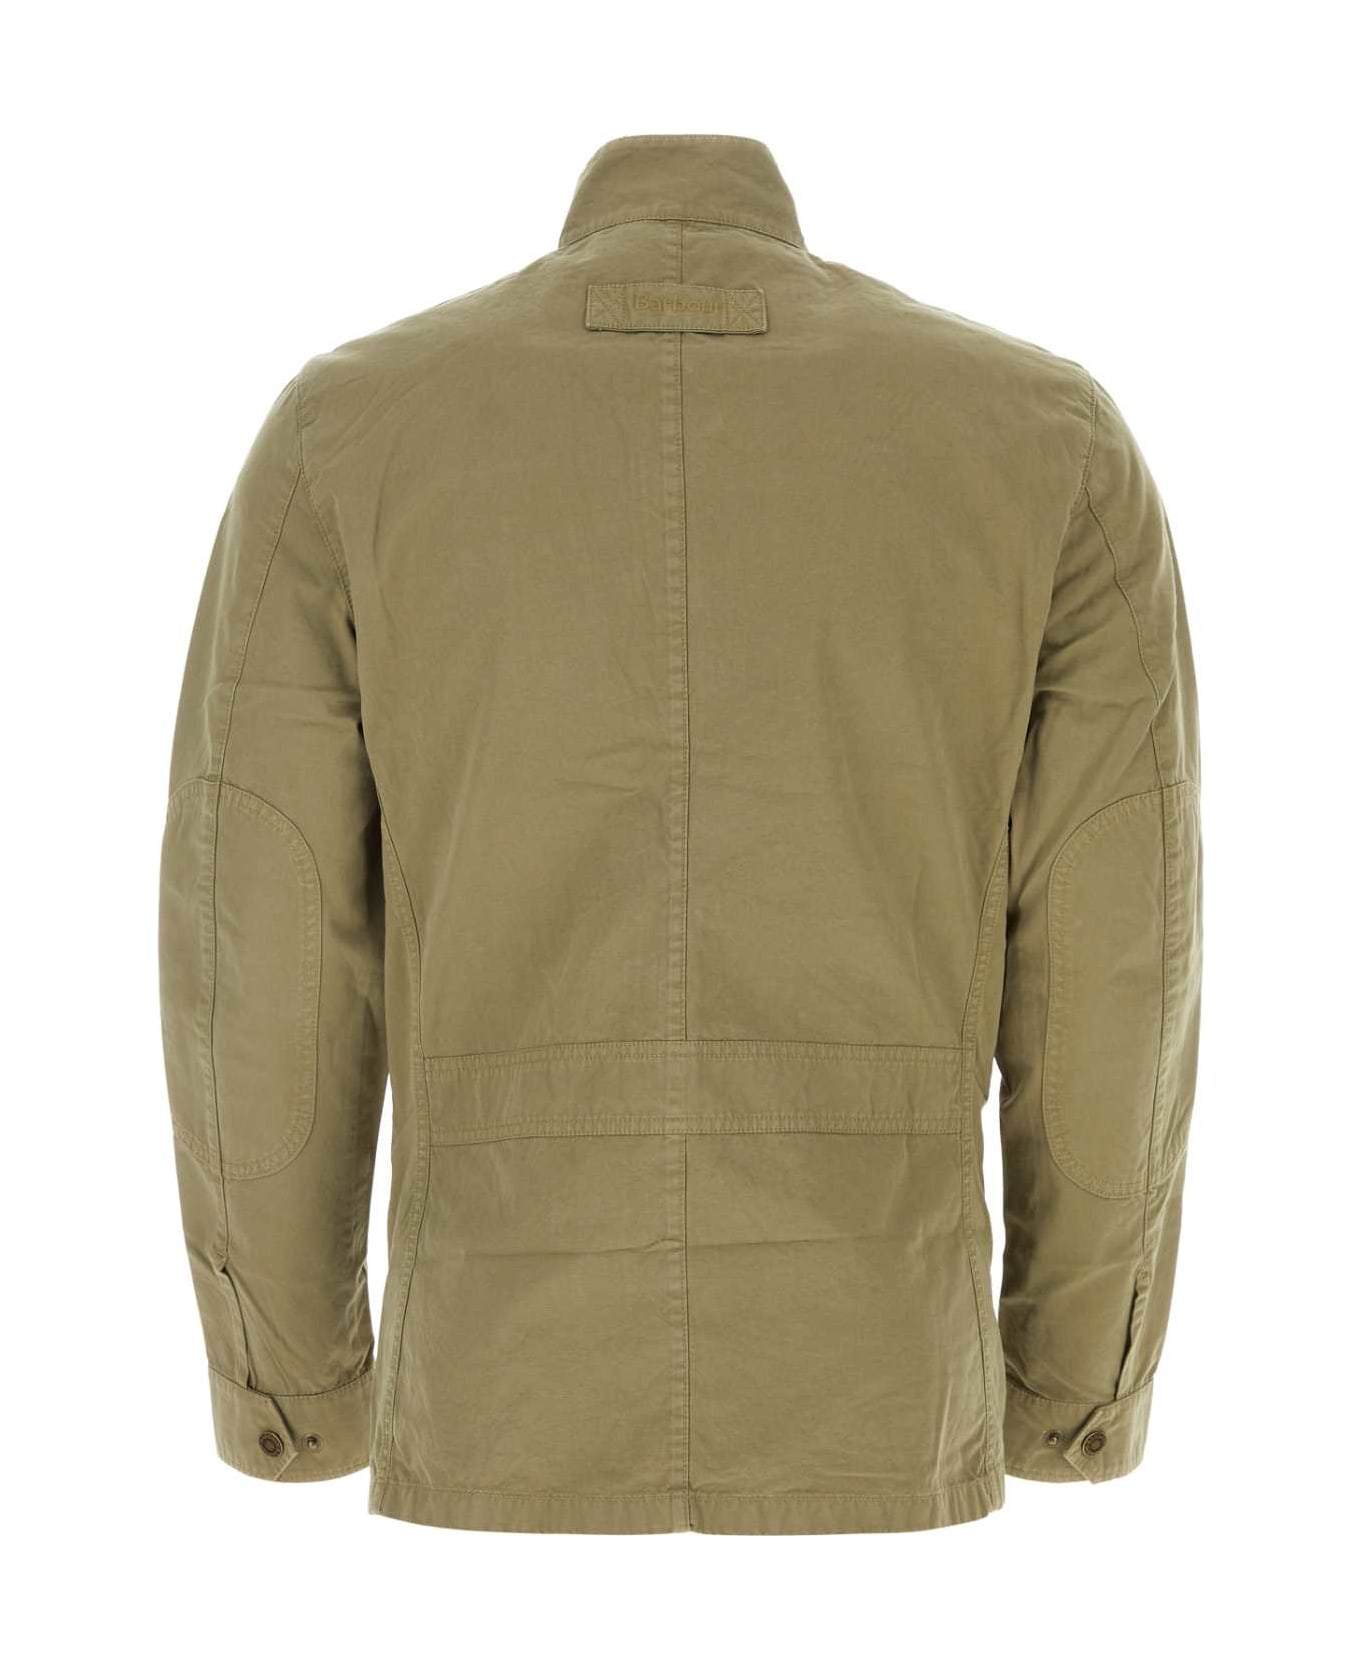 Barbour Army Green Cotton Jacket - OLIVE